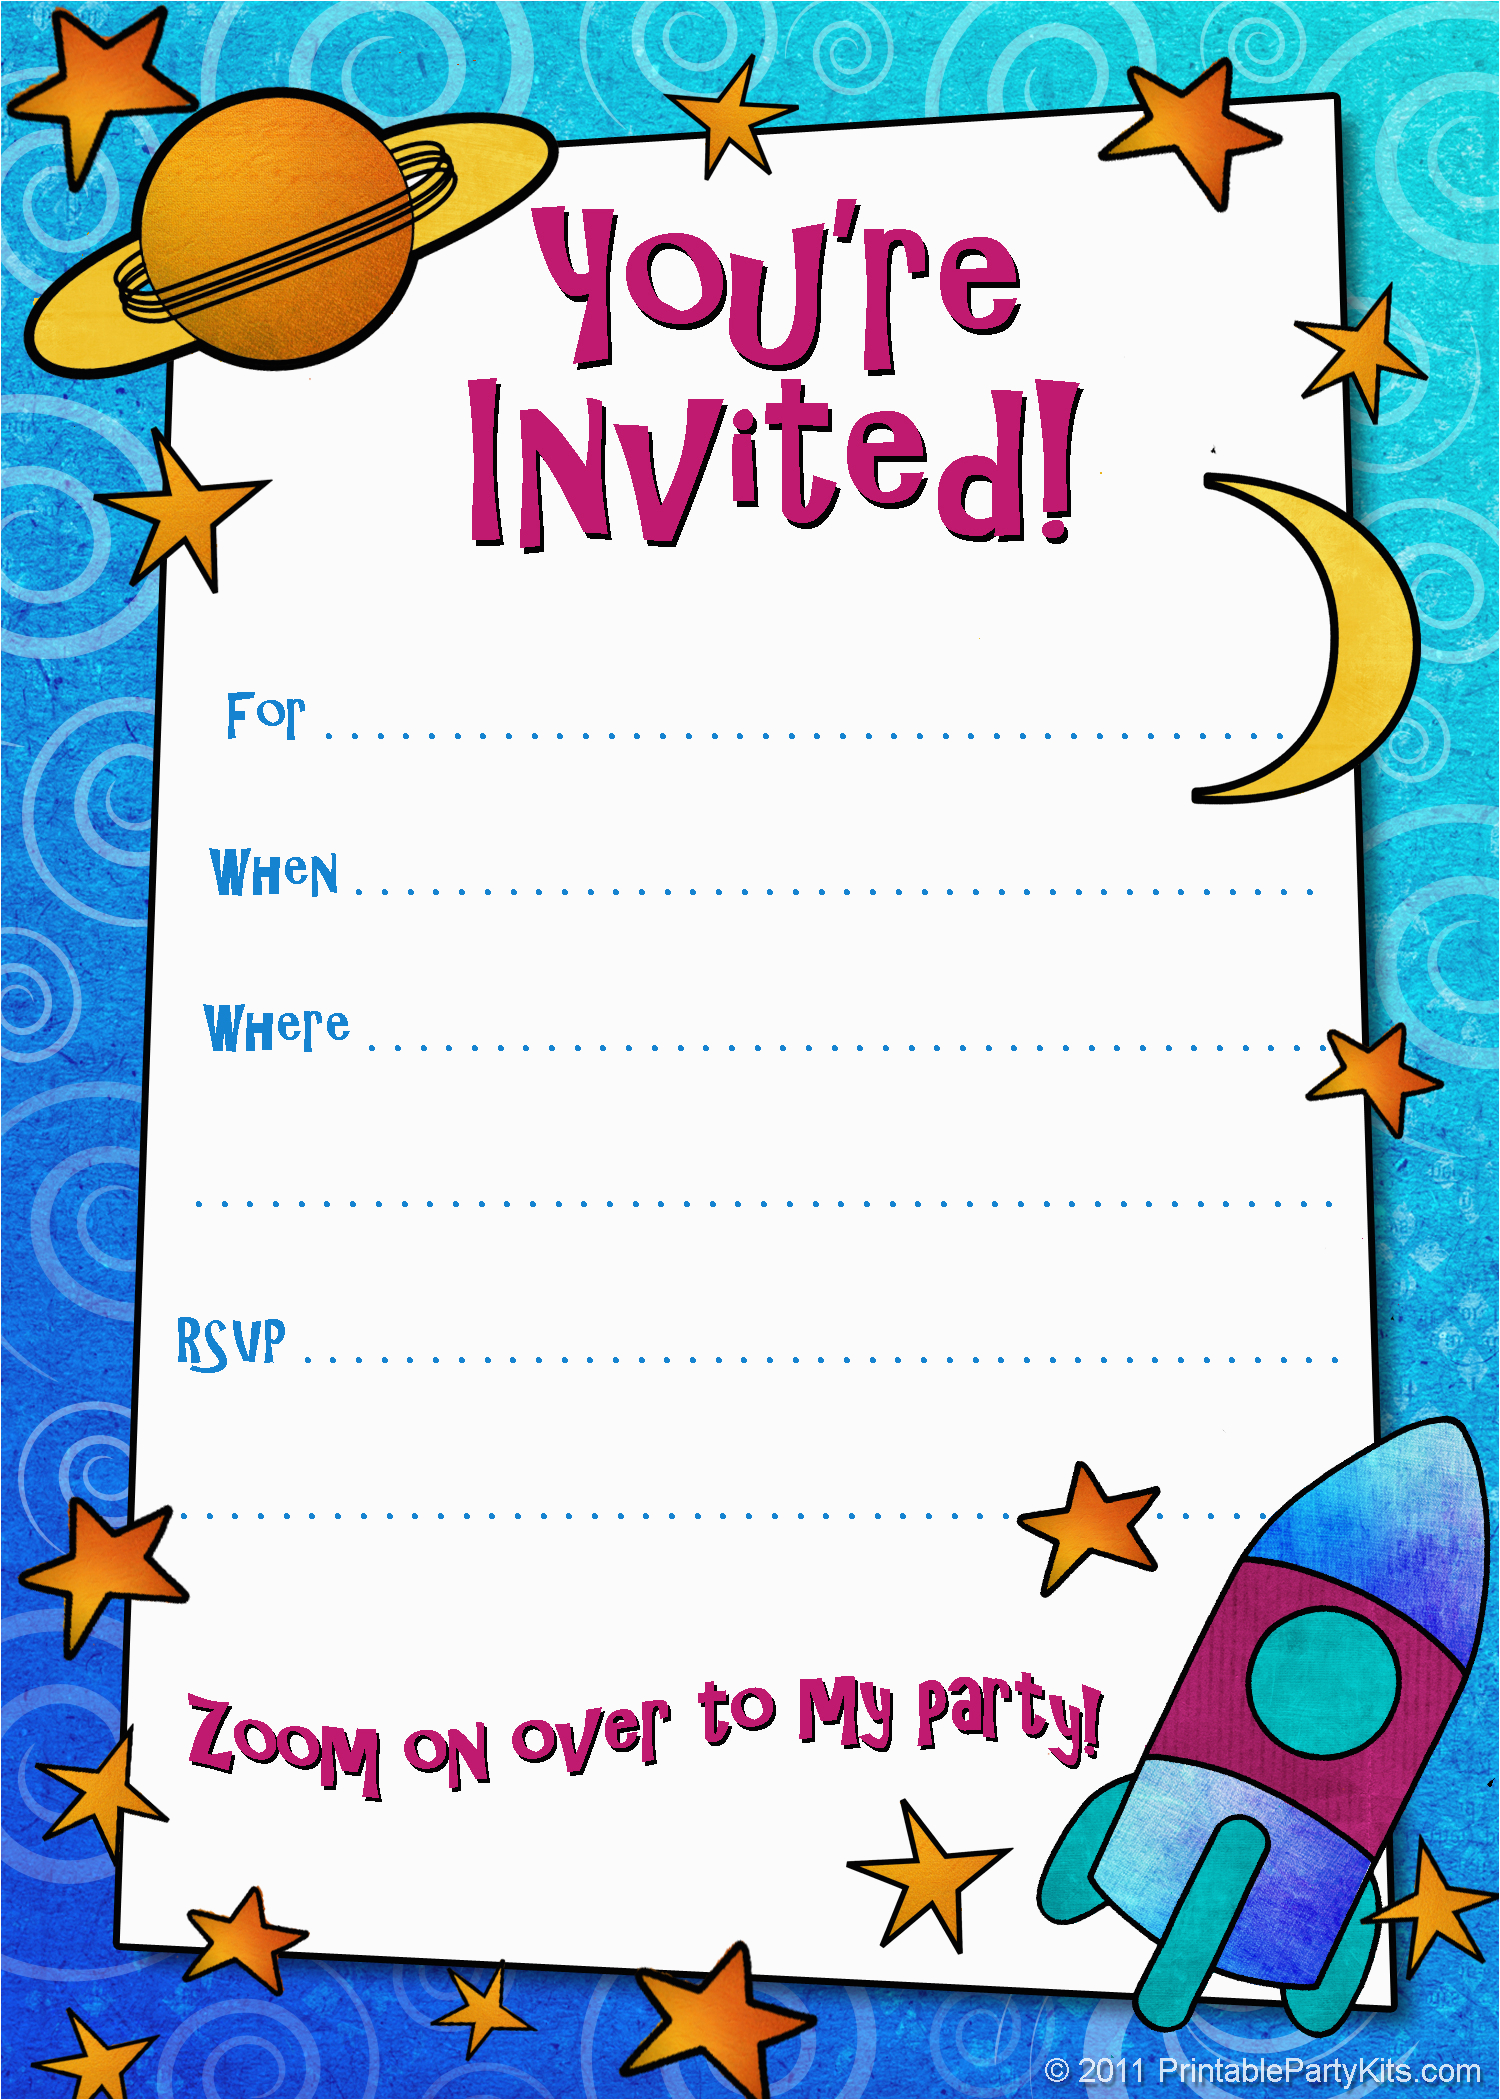 create birthday invitations free download images for inspiration